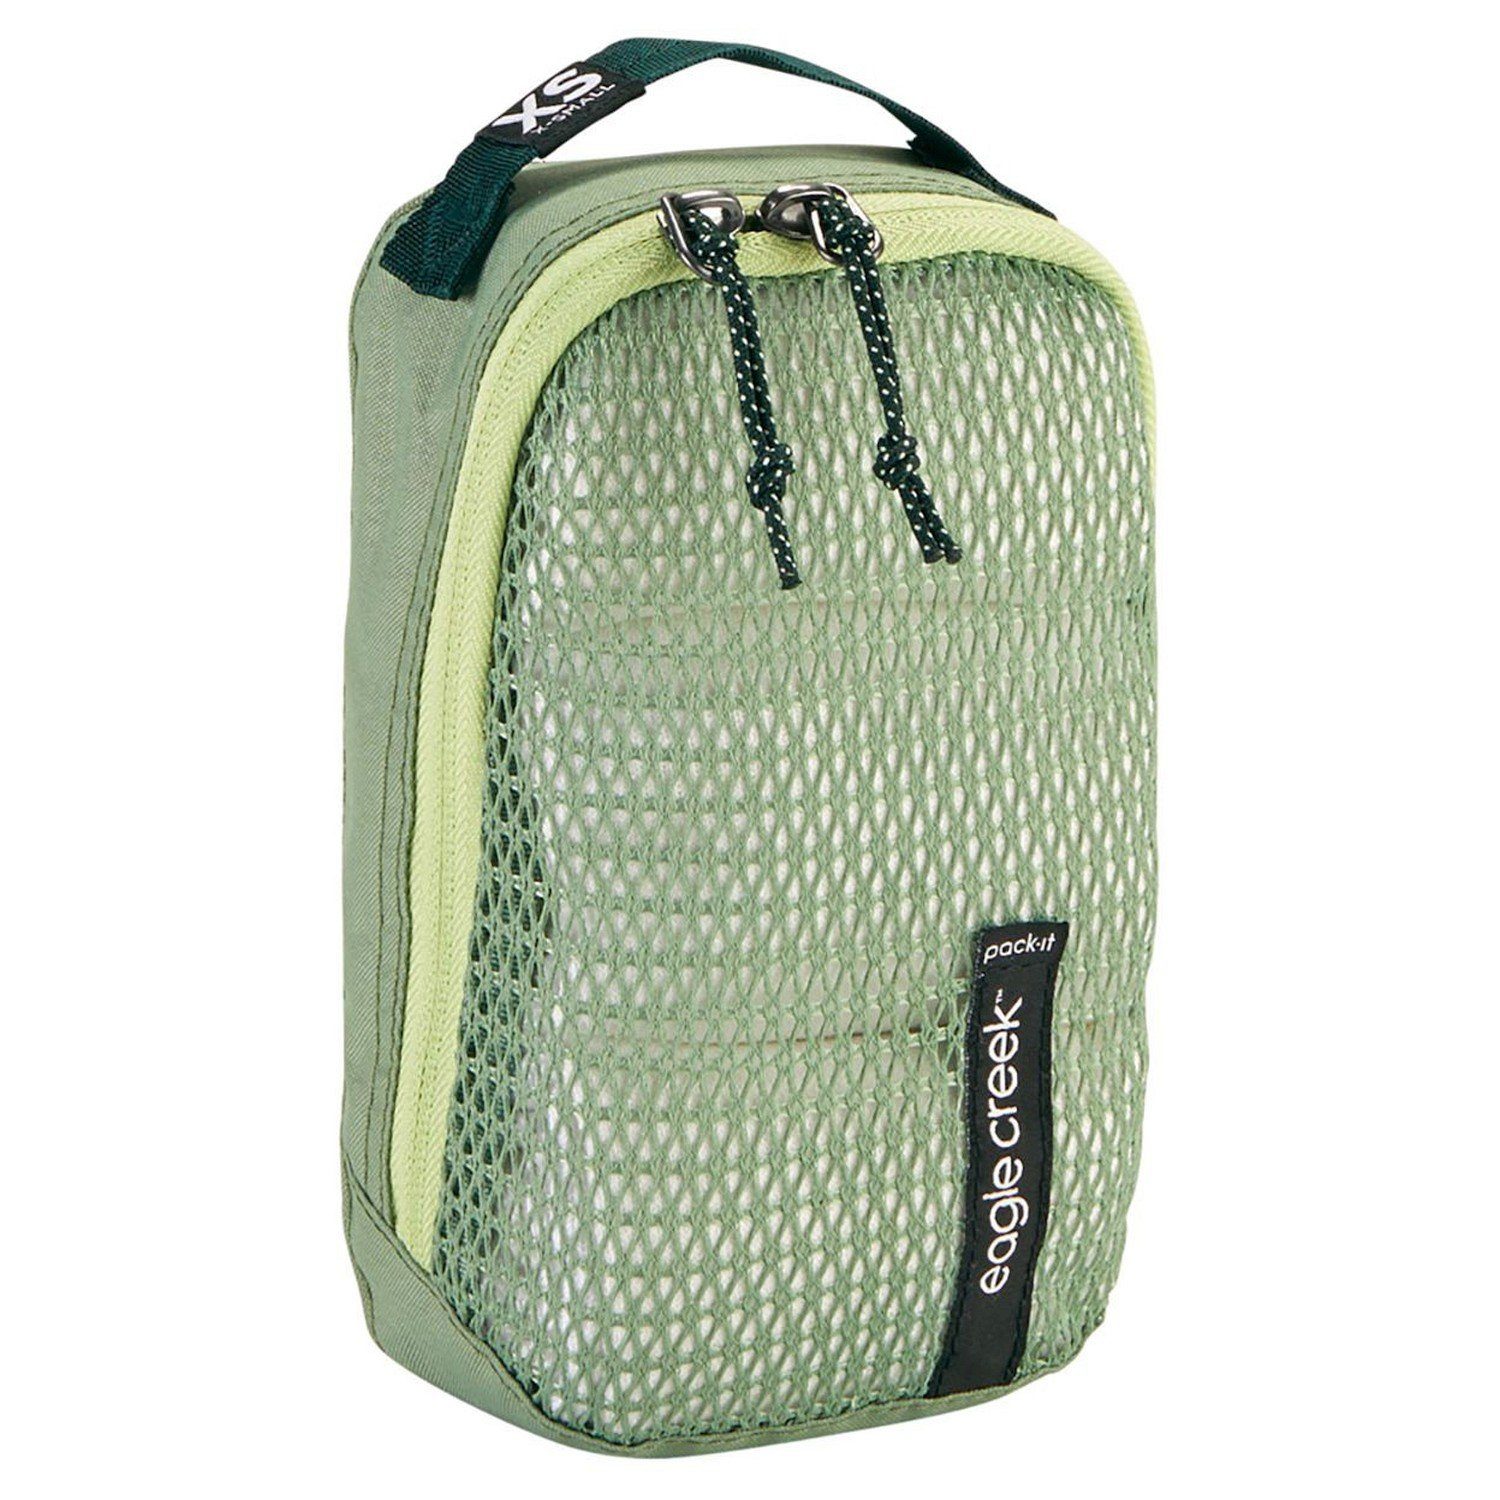 mossy Eagle - Packsack 19 Cube Reveal Creek selection XS green Trolley Pack-It cm